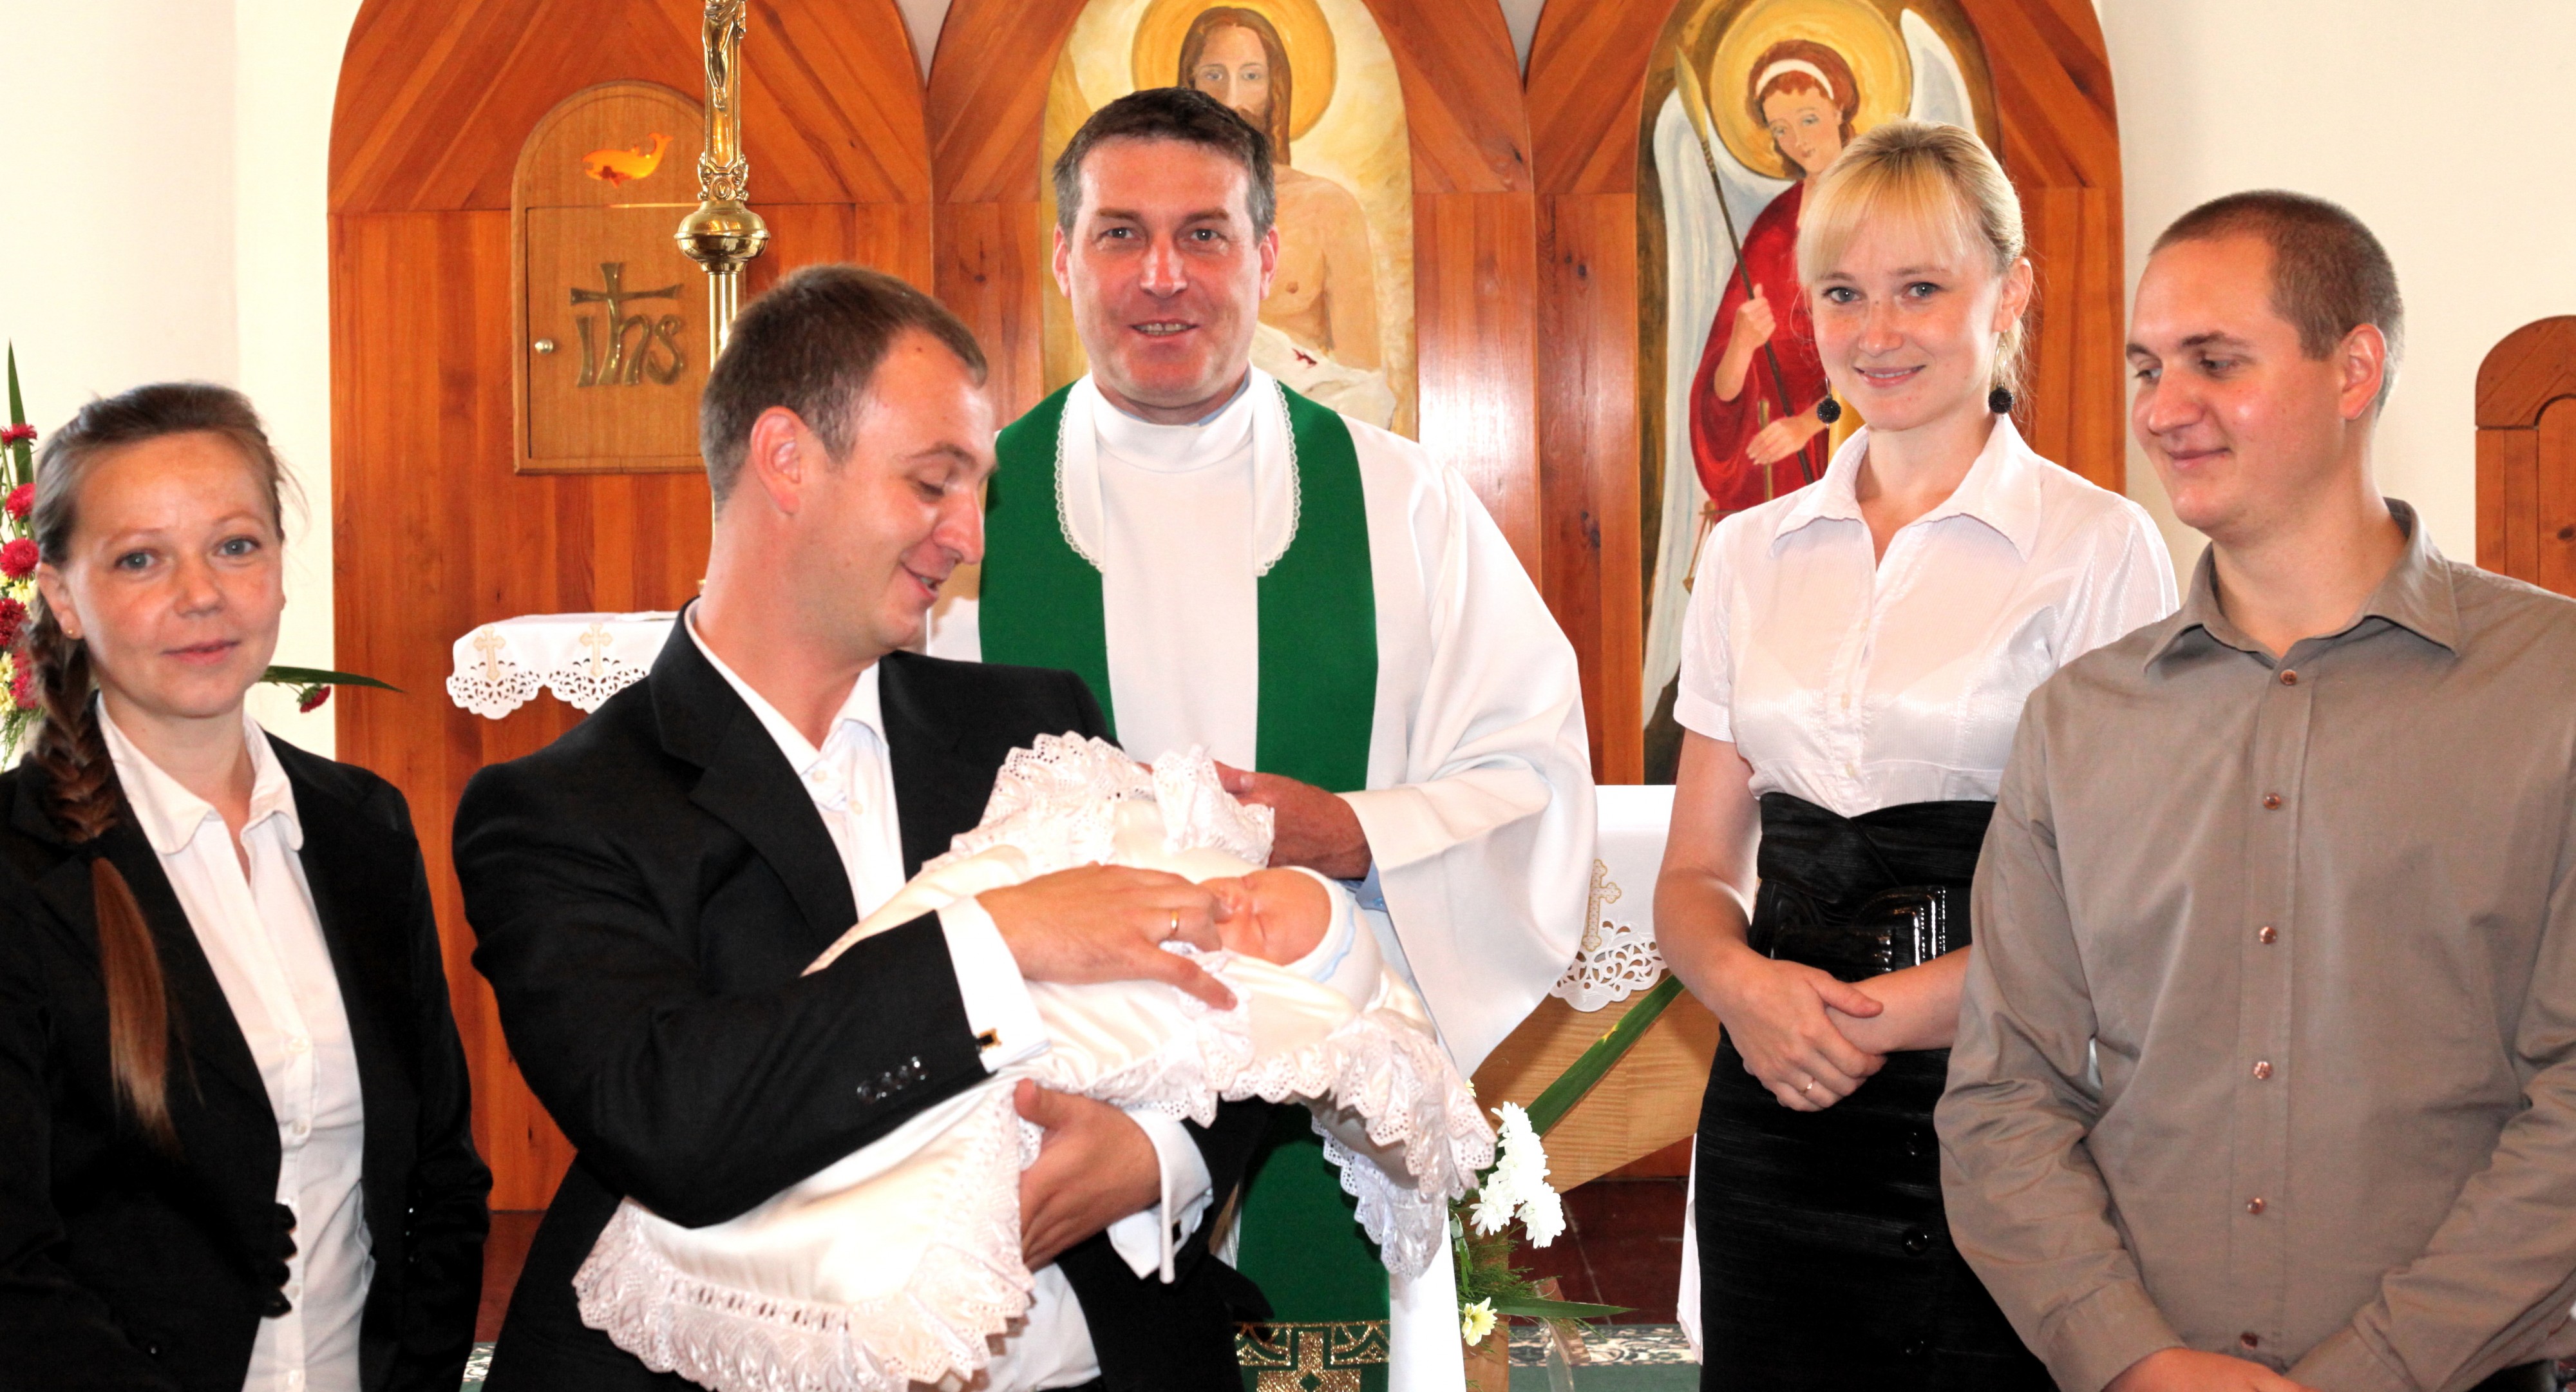 godparents, parents and the priest after the baptism of a baby boy in the Catholic Church, photo 21